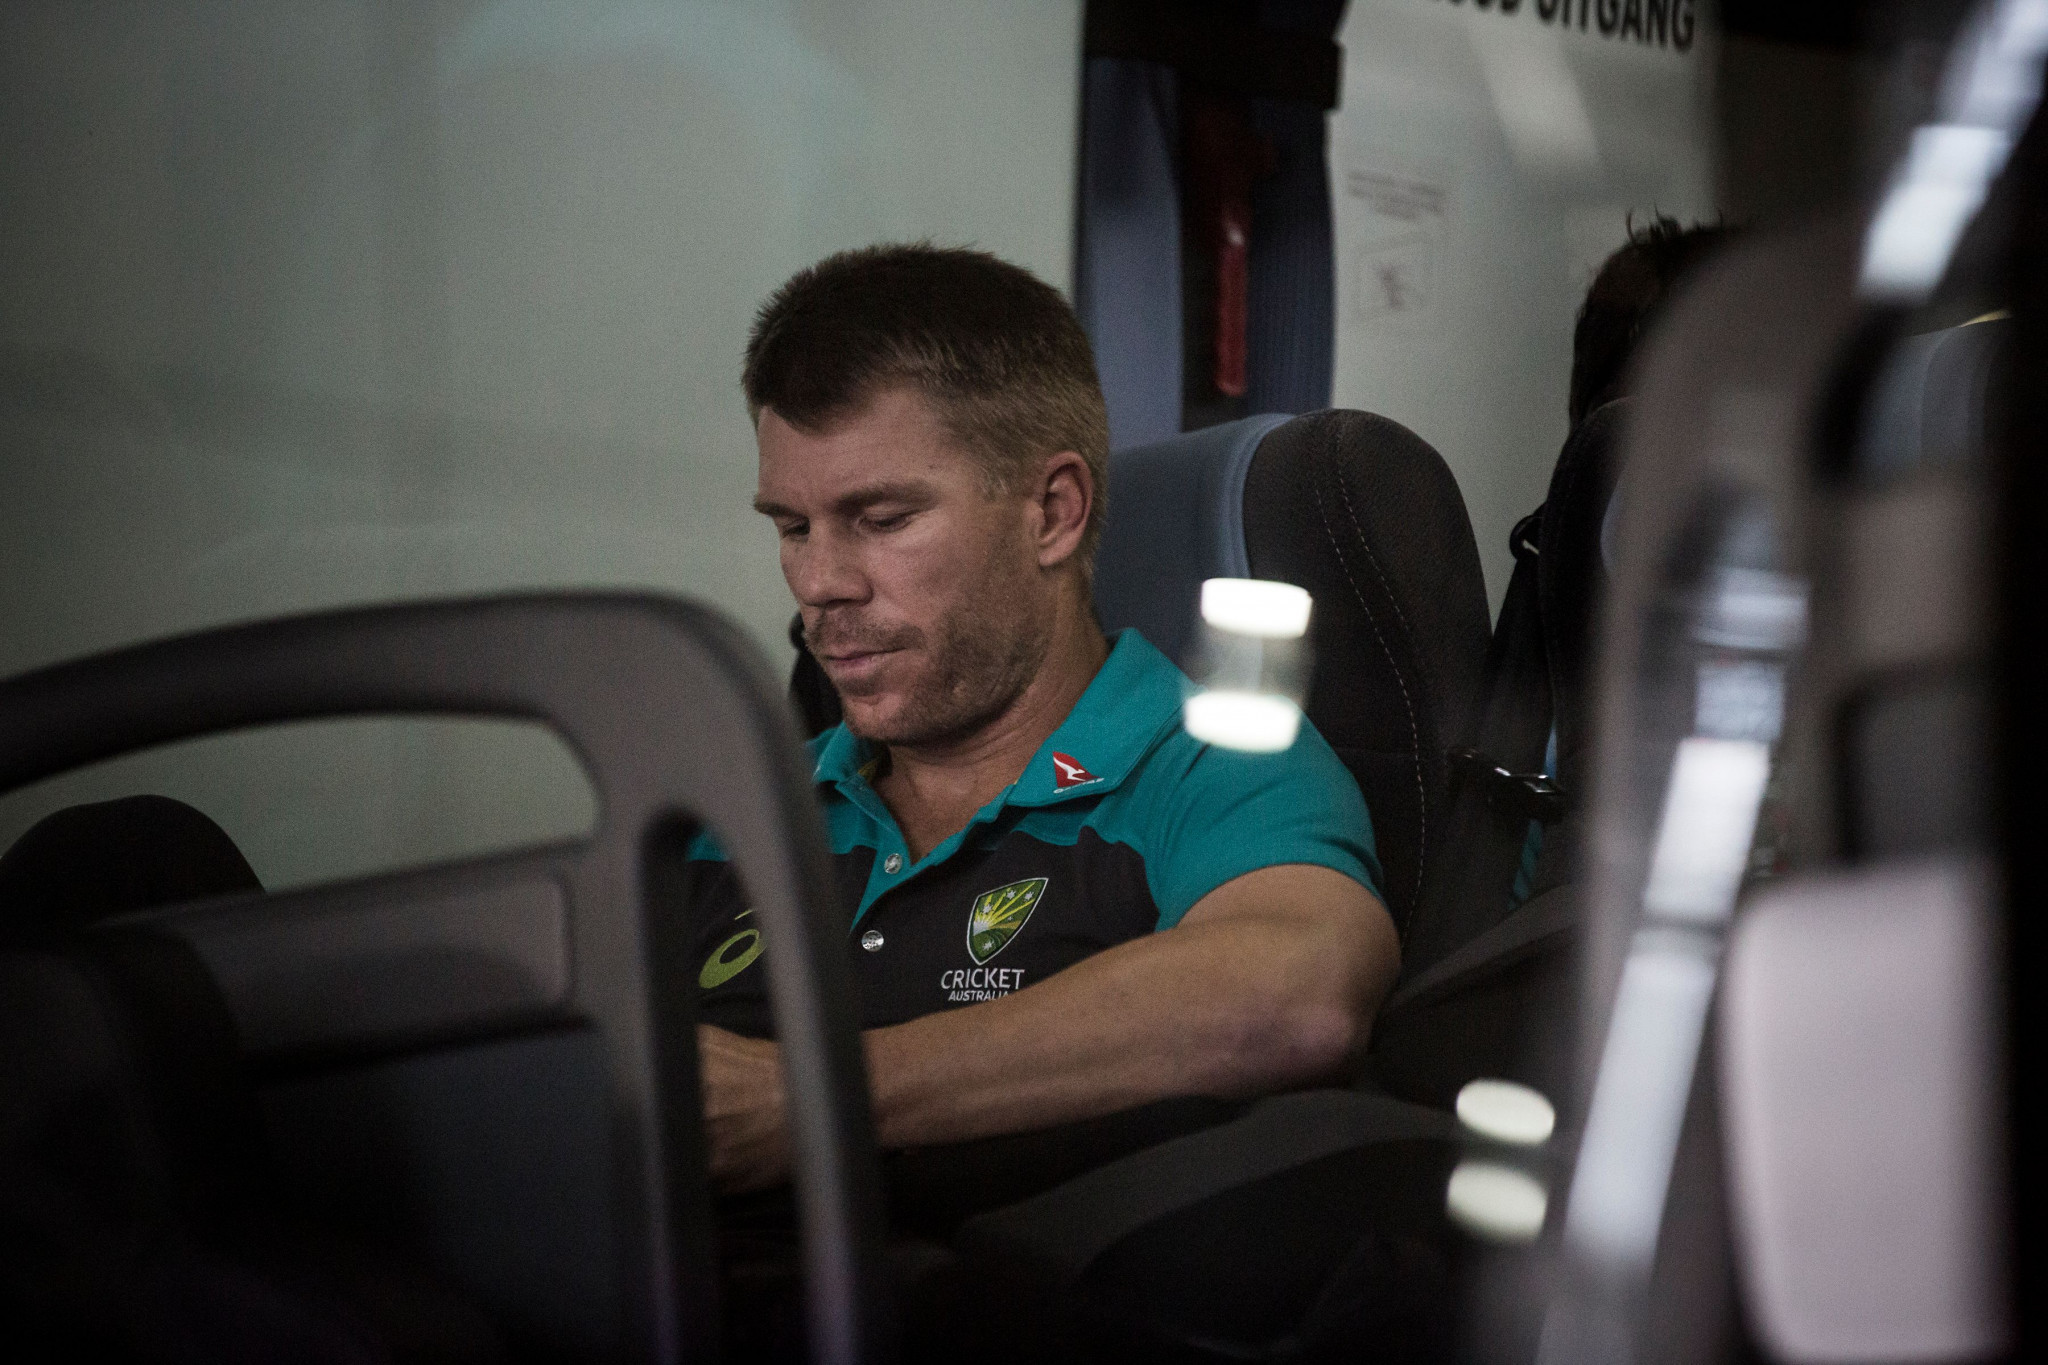 David Warner publicly apologised for his role in the incident today ©Getty Images